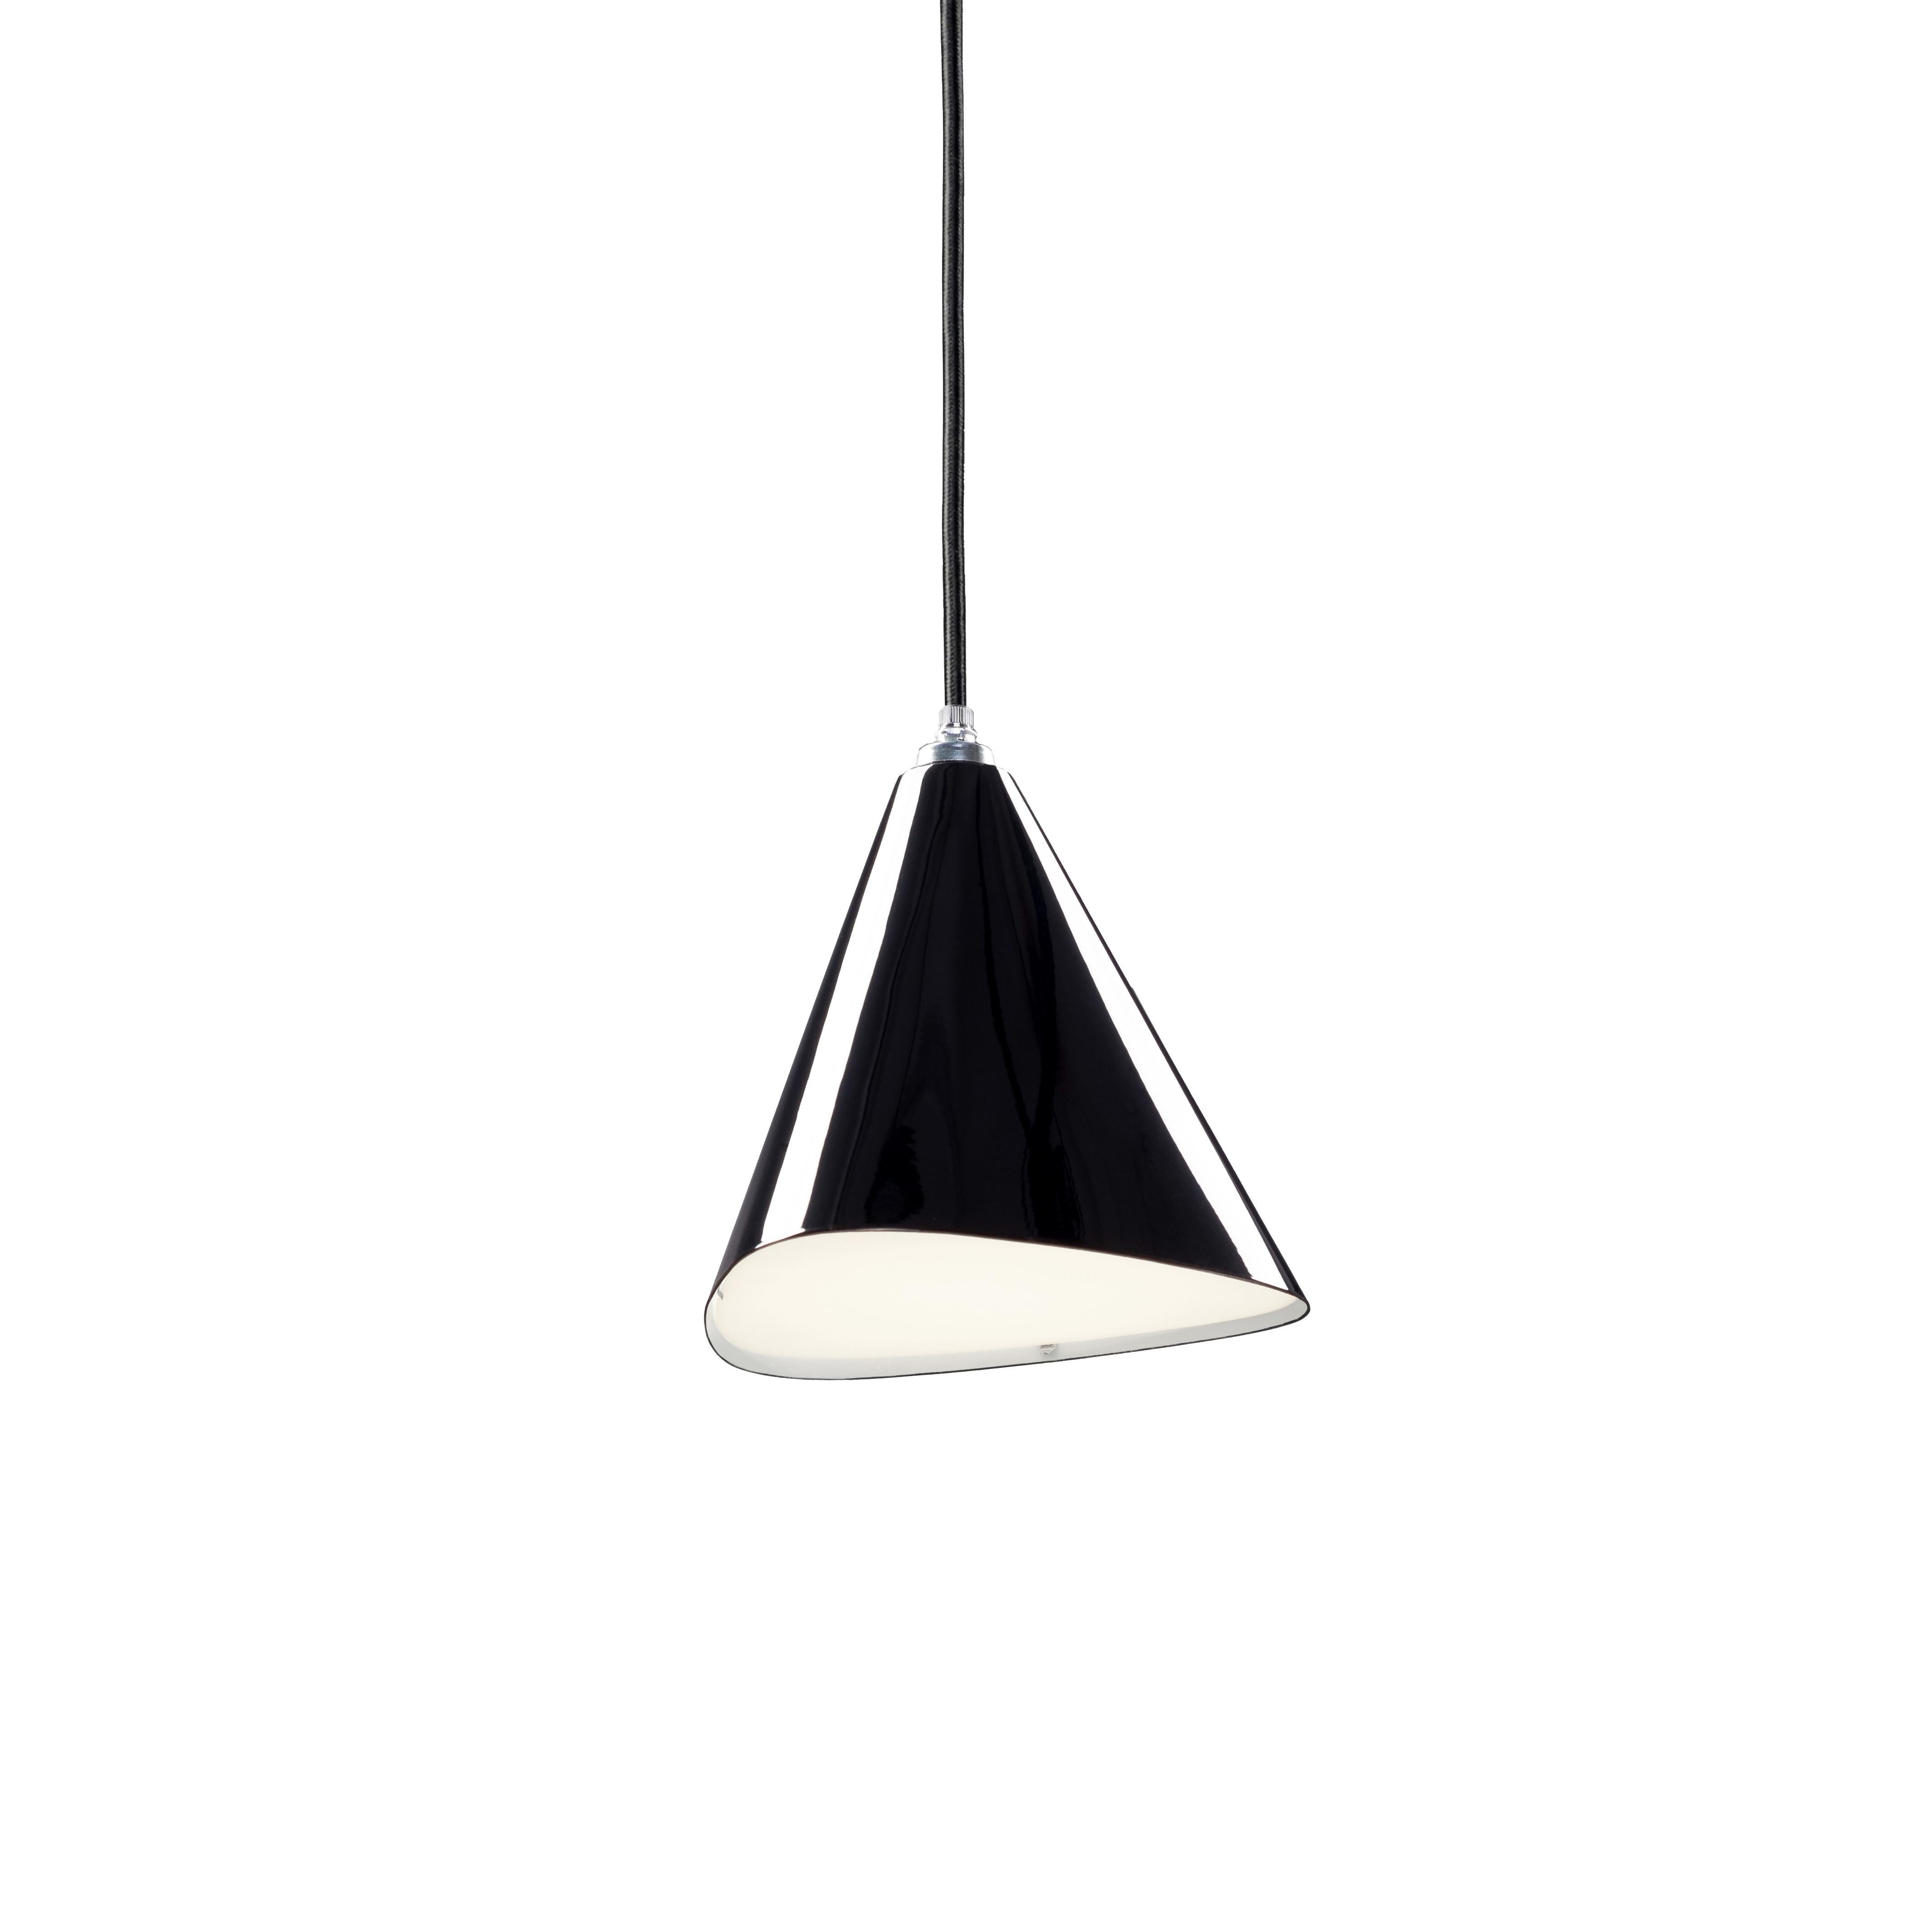 Daniel Becker 'Emily III' Pendant Lamp in Anthracite For Sale 1